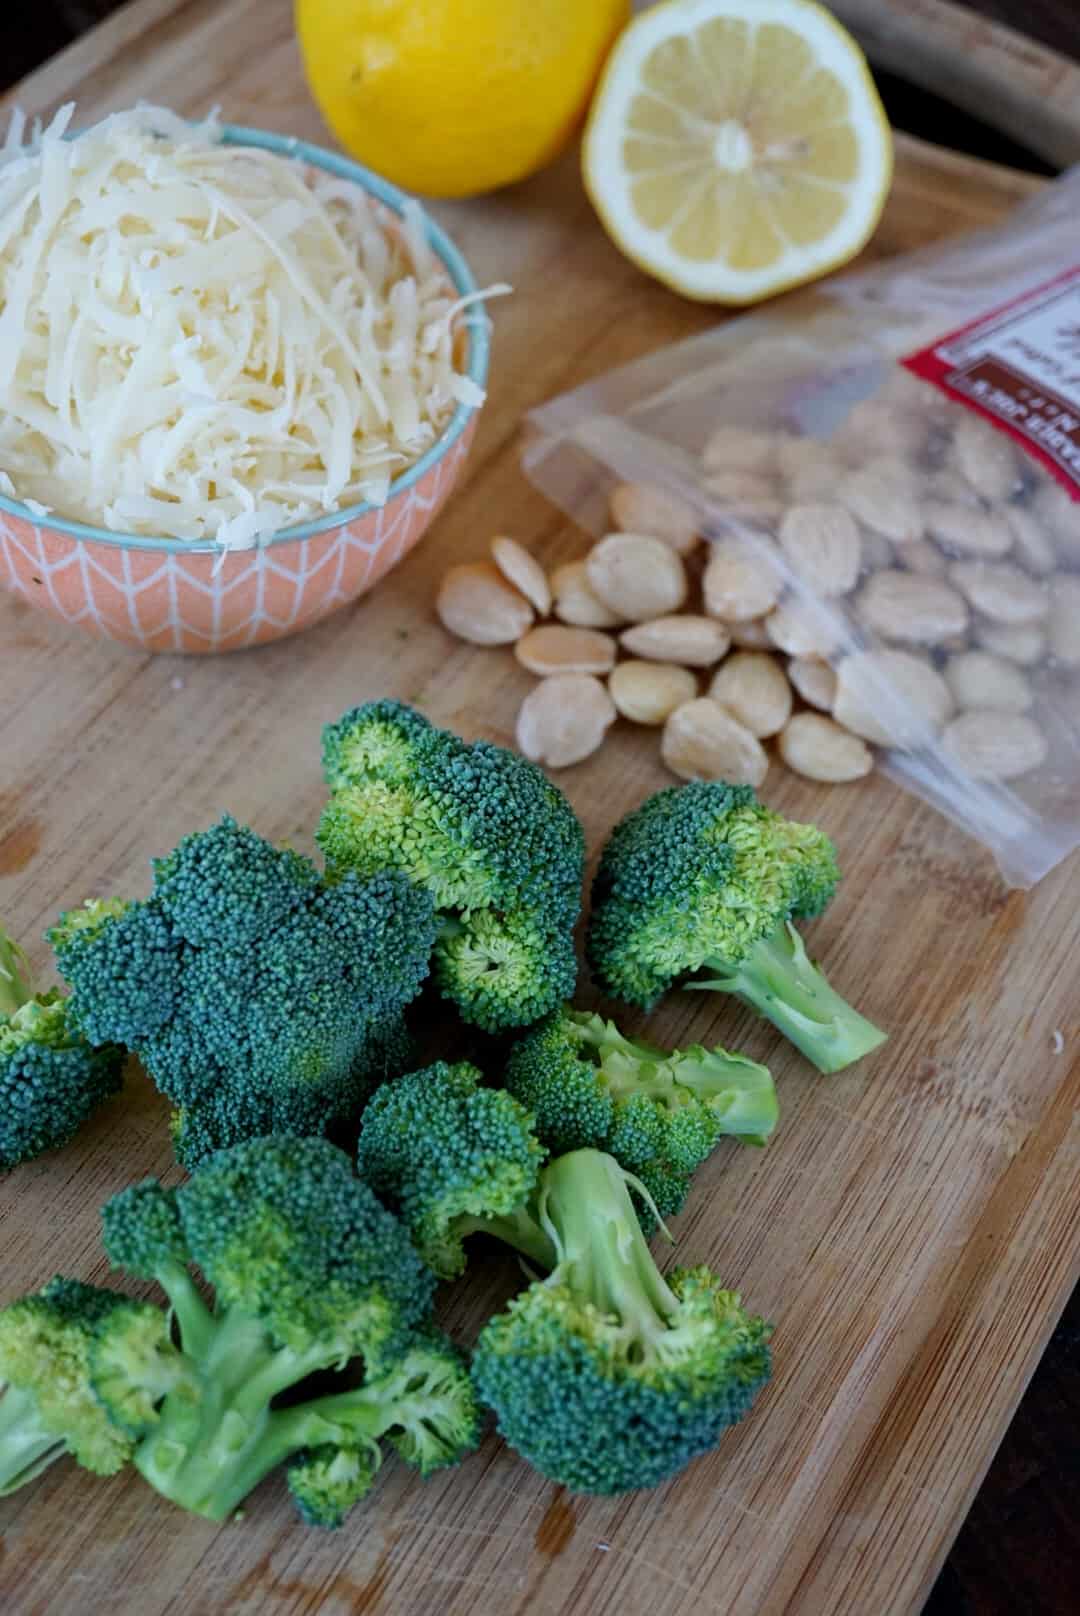 Broccoli, cheese, lemon, and almonds on a cutting board